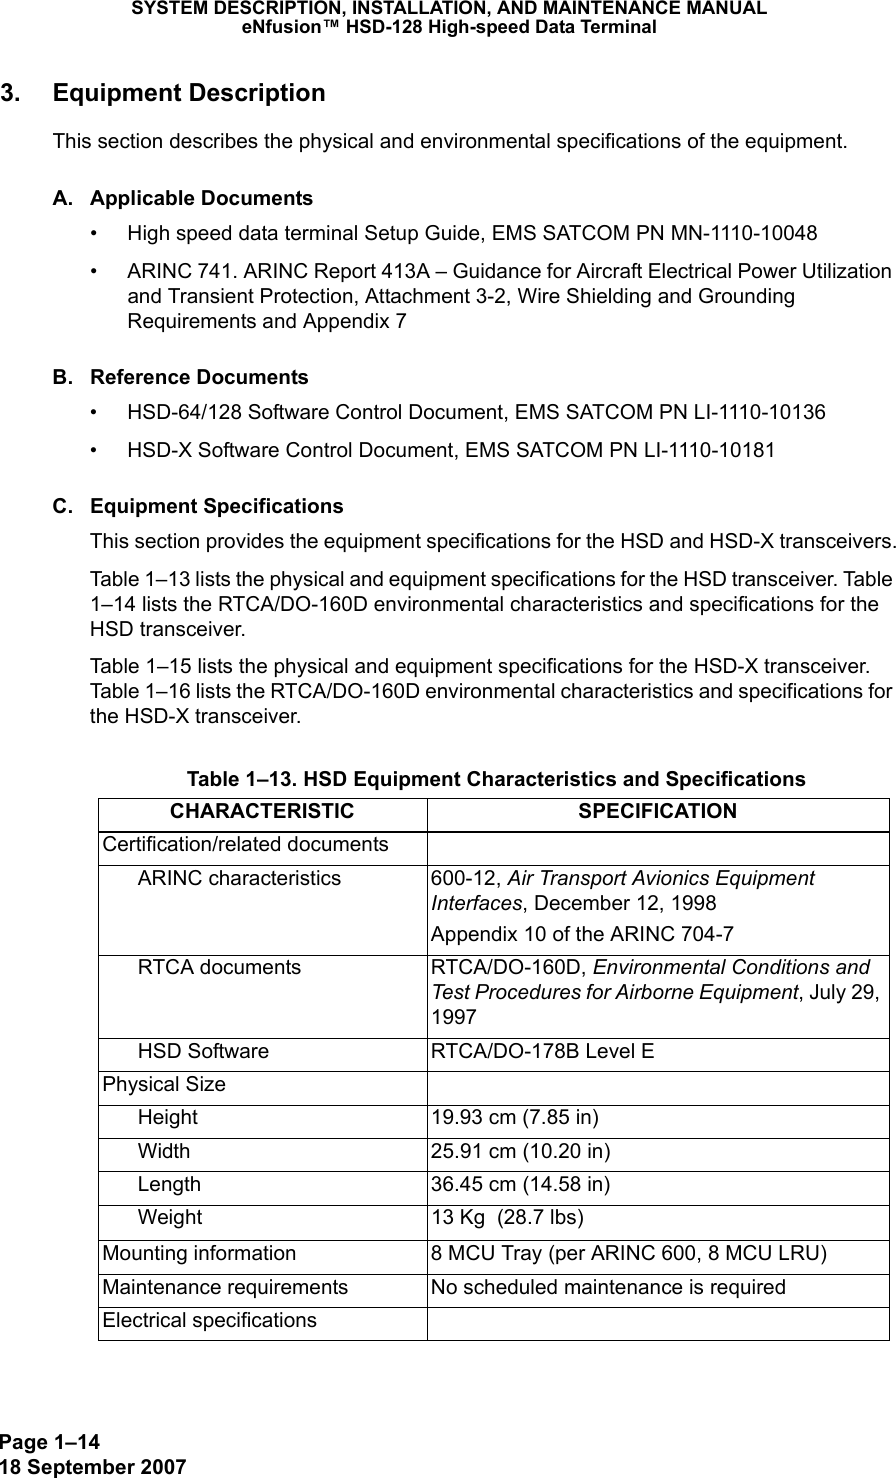 Page 1–1418 September 2007SYSTEM DESCRIPTION, INSTALLATION, AND MAINTENANCE MANUALeNfusion™ HSD-128 High-speed Data Terminal3. Equipment DescriptionThis section describes the physical and environmental specifications of the equipment. A. Applicable Documents• High speed data terminal Setup Guide, EMS SATCOM PN MN-1110-10048• ARINC 741. ARINC Report 413A – Guidance for Aircraft Electrical Power Utilization and Transient Protection, Attachment 3-2, Wire Shielding and Grounding Requirements and Appendix 7B. Reference Documents• HSD-64/128 Software Control Document, EMS SATCOM PN LI-1110-10136• HSD-X Software Control Document, EMS SATCOM PN LI-1110-10181C. Equipment SpecificationsThis section provides the equipment specifications for the HSD and HSD-X transceivers.Table 1–13 lists the physical and equipment specifications for the HSD transceiver. Table 1–14 lists the RTCA/DO-160D environmental characteristics and specifications for the HSD transceiver.Table 1–15 lists the physical and equipment specifications for the HSD-X transceiver. Table 1–16 lists the RTCA/DO-160D environmental characteristics and specifications for the HSD-X transceiver. Table 1–13. HSD Equipment Characteristics and SpecificationsCHARACTERISTIC SPECIFICATIONCertification/related documentsARINC characteristics 600-12, Air Transport Avionics Equipment Interfaces, December 12, 1998Appendix 10 of the ARINC 704-7RTCA documents RTCA/DO-160D, Environmental Conditions and Test Procedures for Airborne Equipment, July 29, 1997HSD Software RTCA/DO-178B Level EPhysical SizeHeight 19.93 cm (7.85 in)Width 25.91 cm (10.20 in)Length 36.45 cm (14.58 in)Weight 13 Kg  (28.7 lbs)Mounting information 8 MCU Tray (per ARINC 600, 8 MCU LRU)Maintenance requirements No scheduled maintenance is requiredElectrical specifications